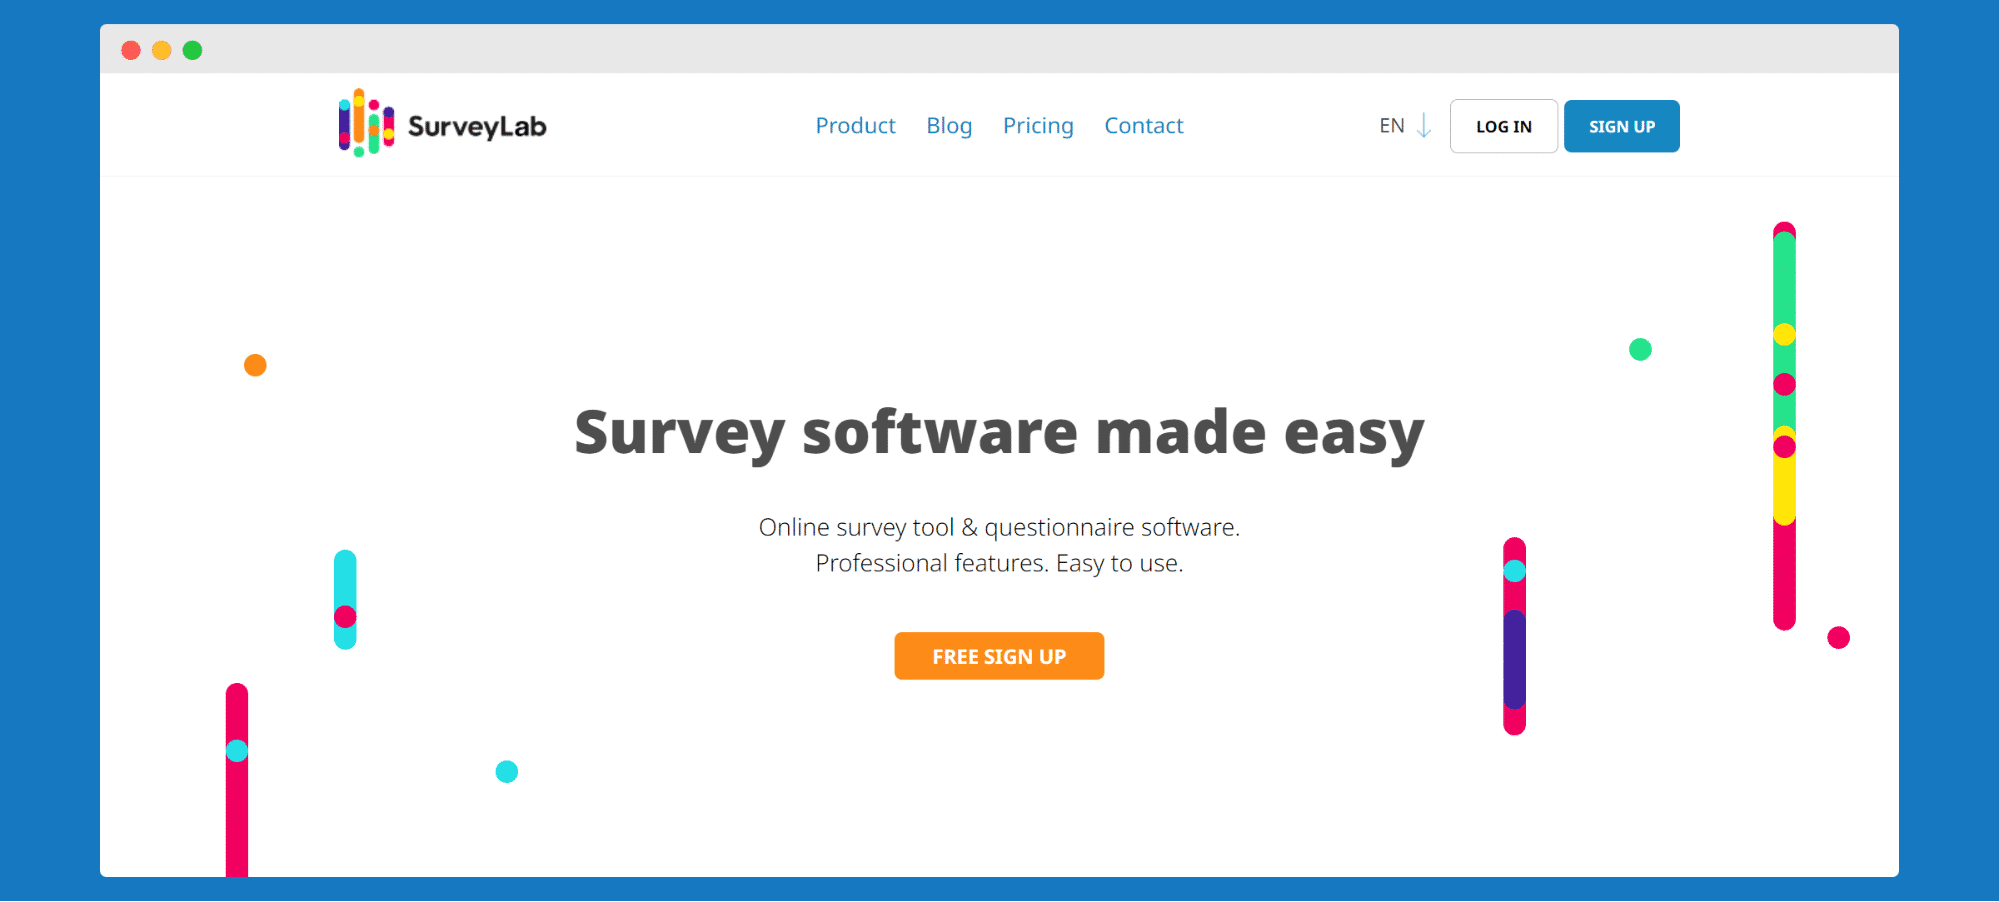 SurveyLab - a tool that helps collect feedback and boost customer experience